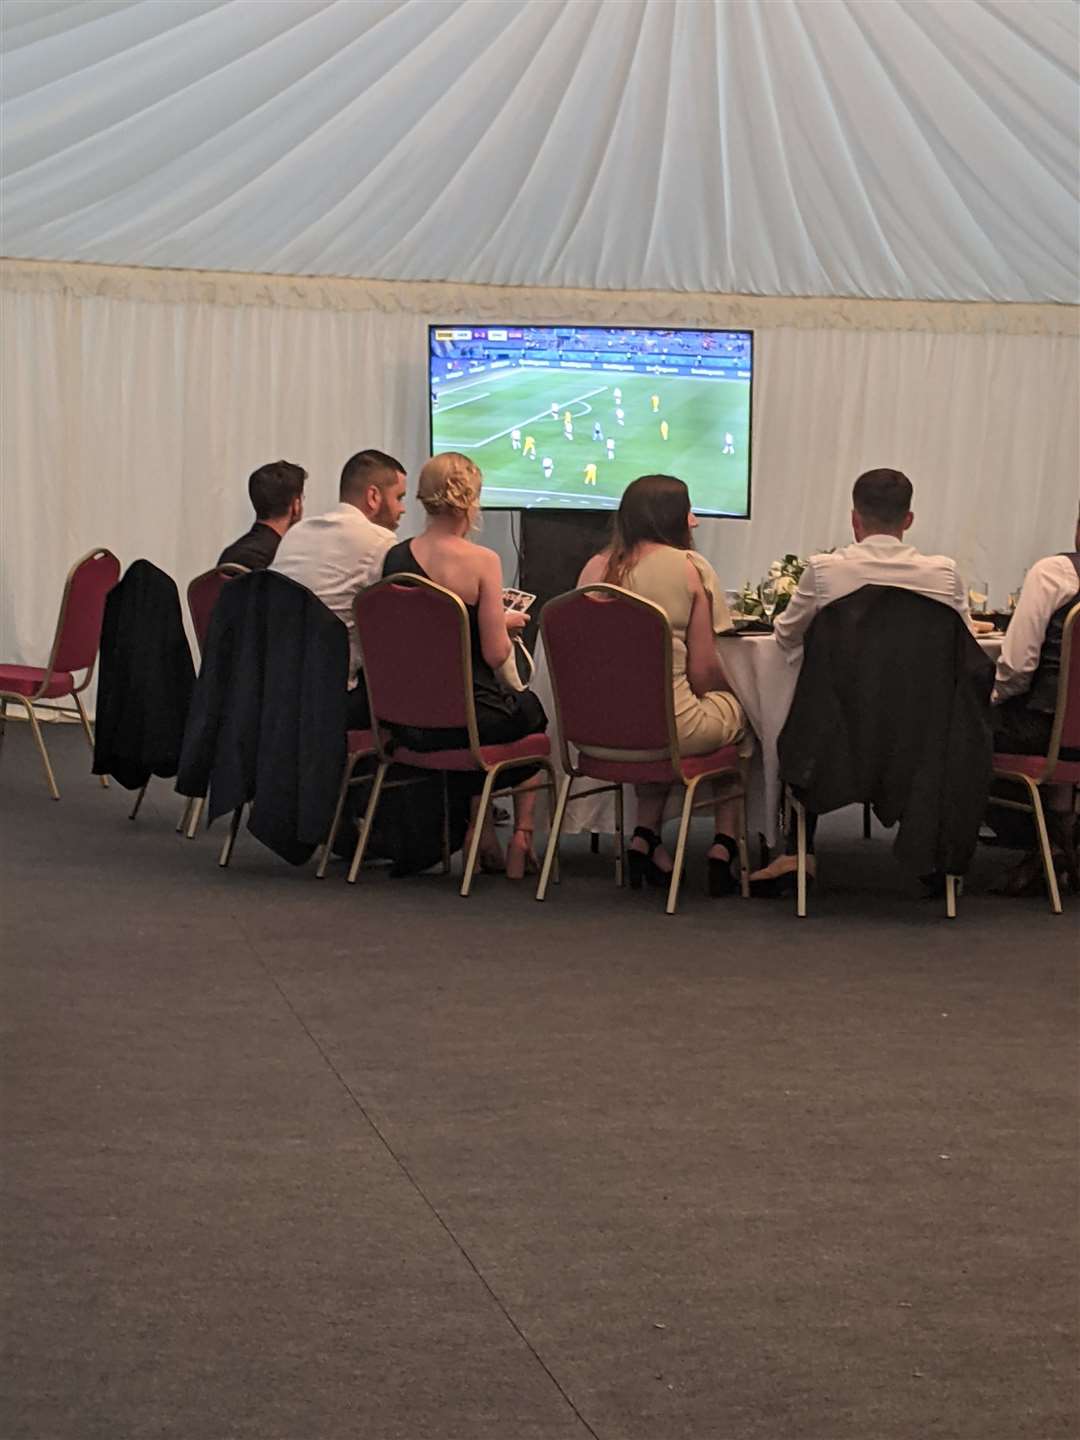 Wedding guests watch the game (48846069)